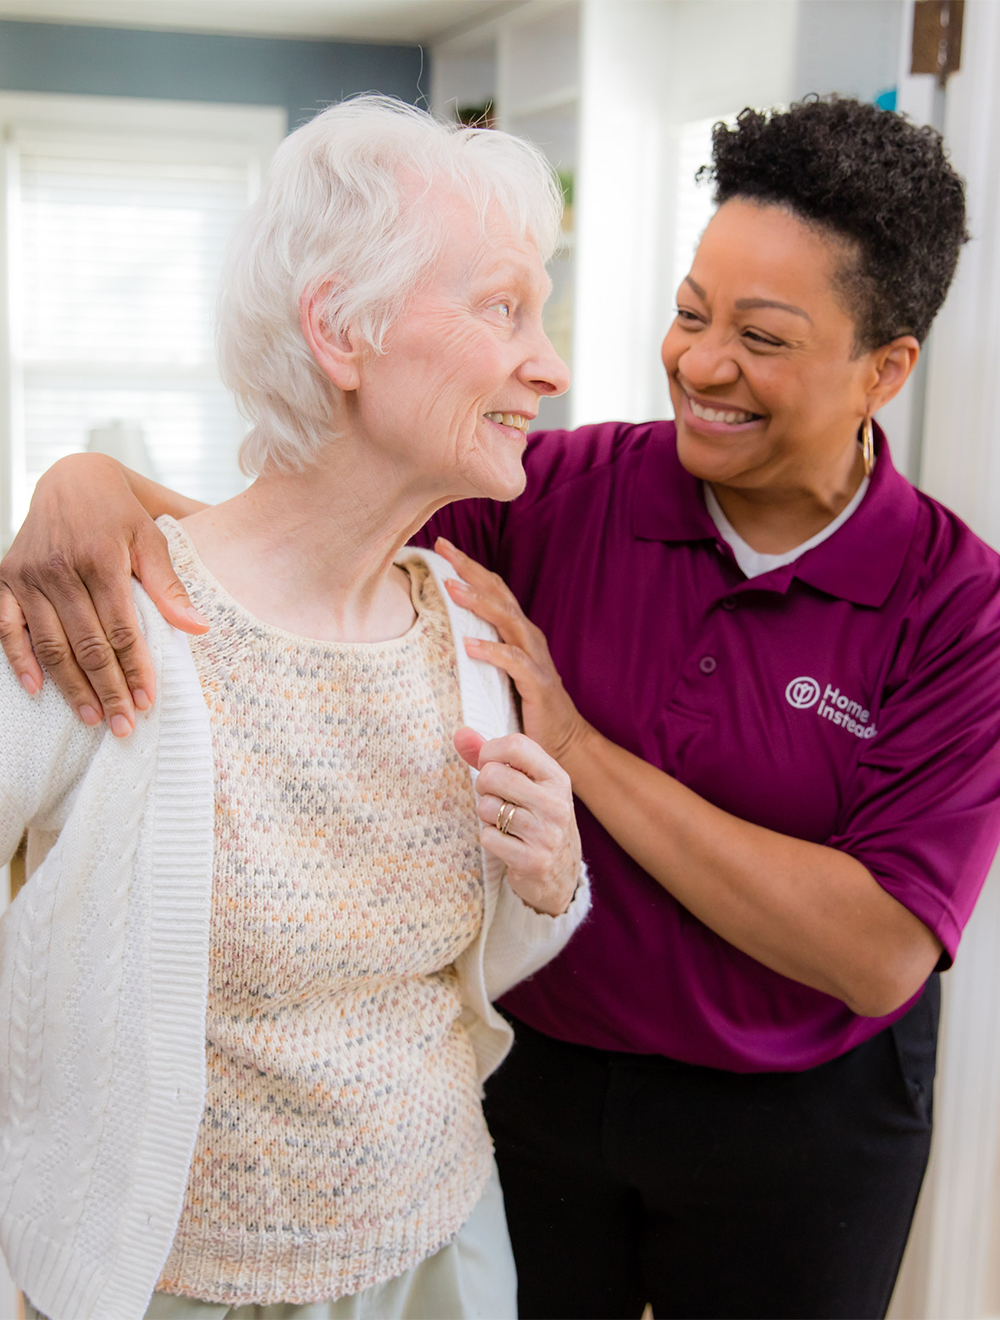 The benefits of rehabilitation and recuperation care